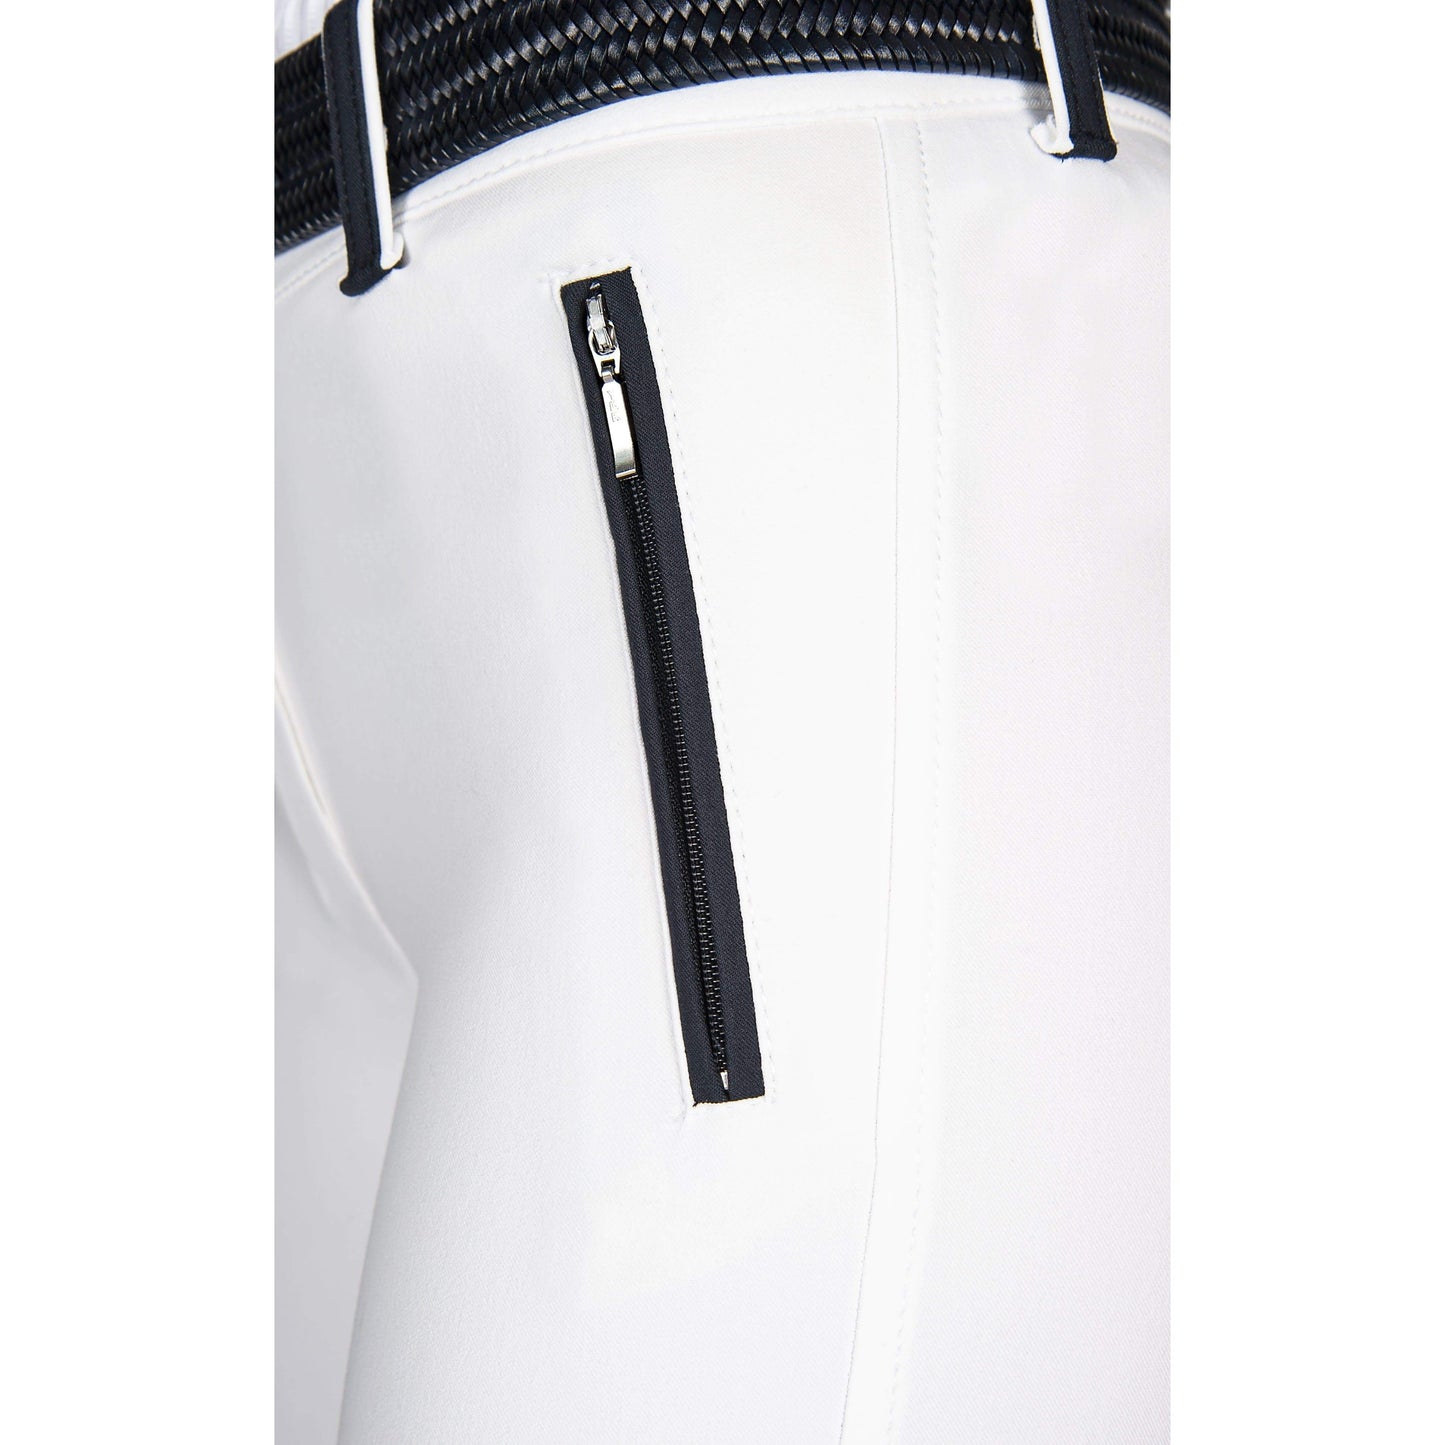 Equiline Angy Ladies Full Seat Breeches-Dapple EQ-The Equestrian